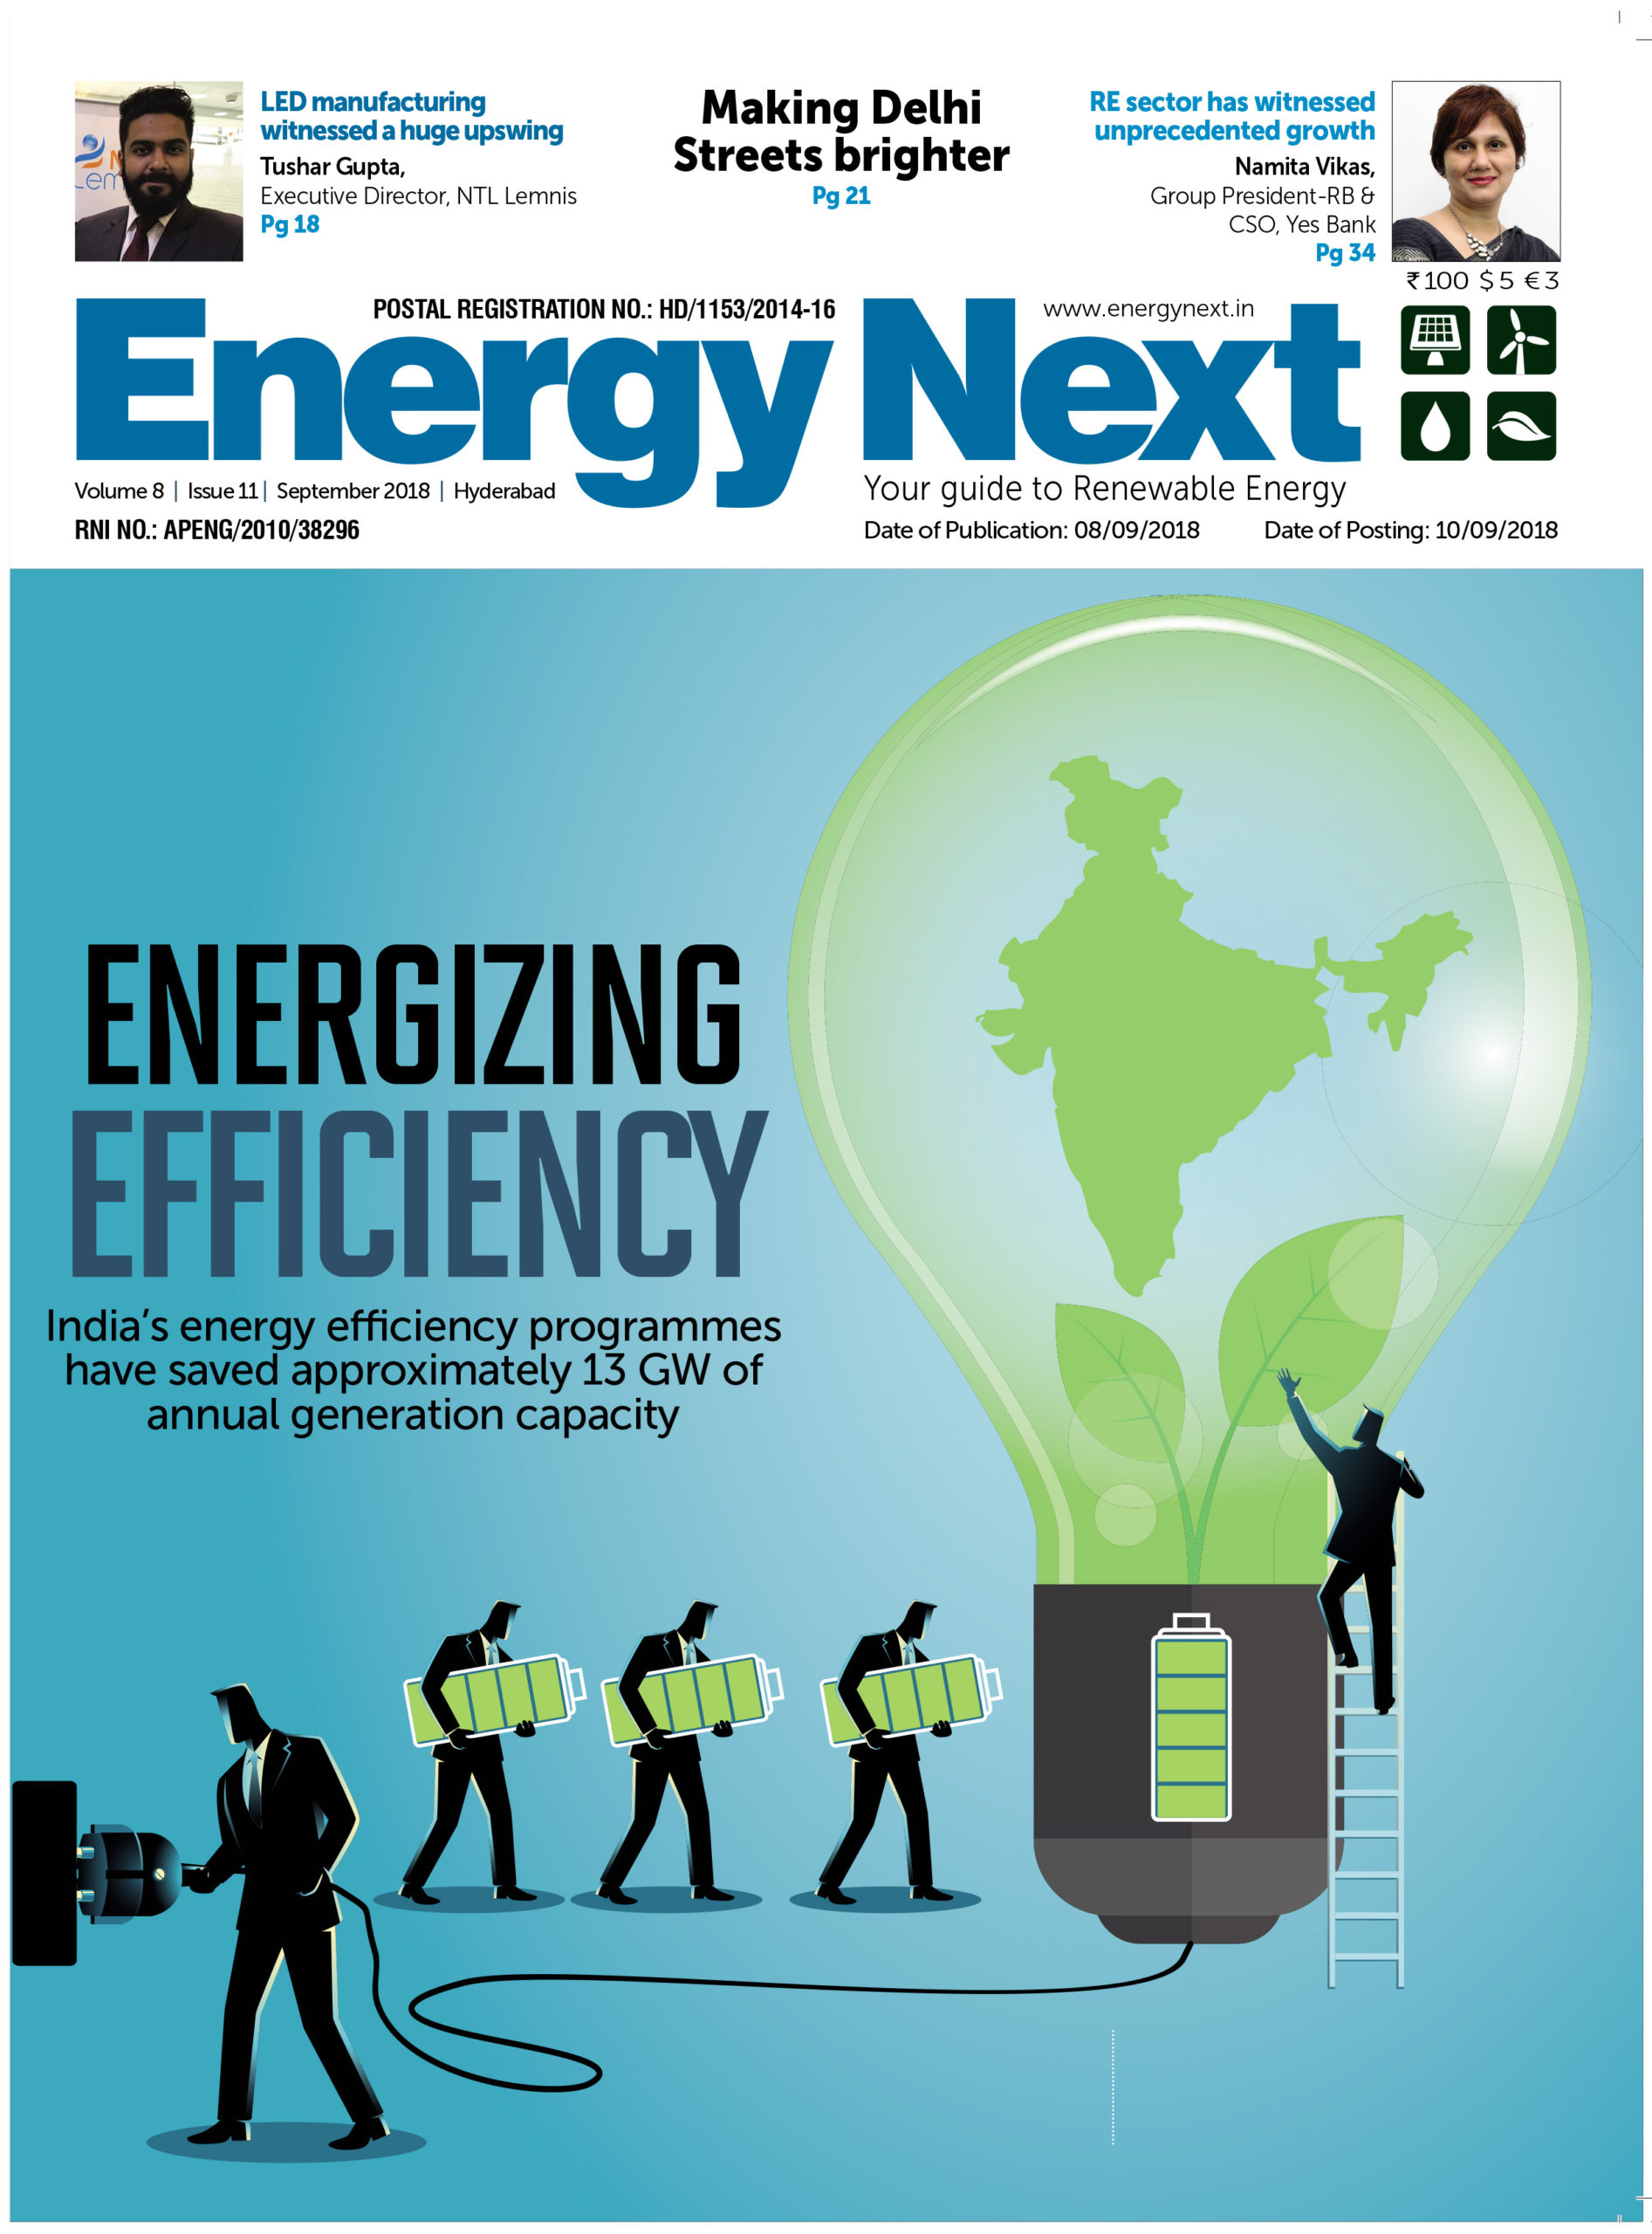 EnergyNext volume 8 issue 11 sept 2018 scaled